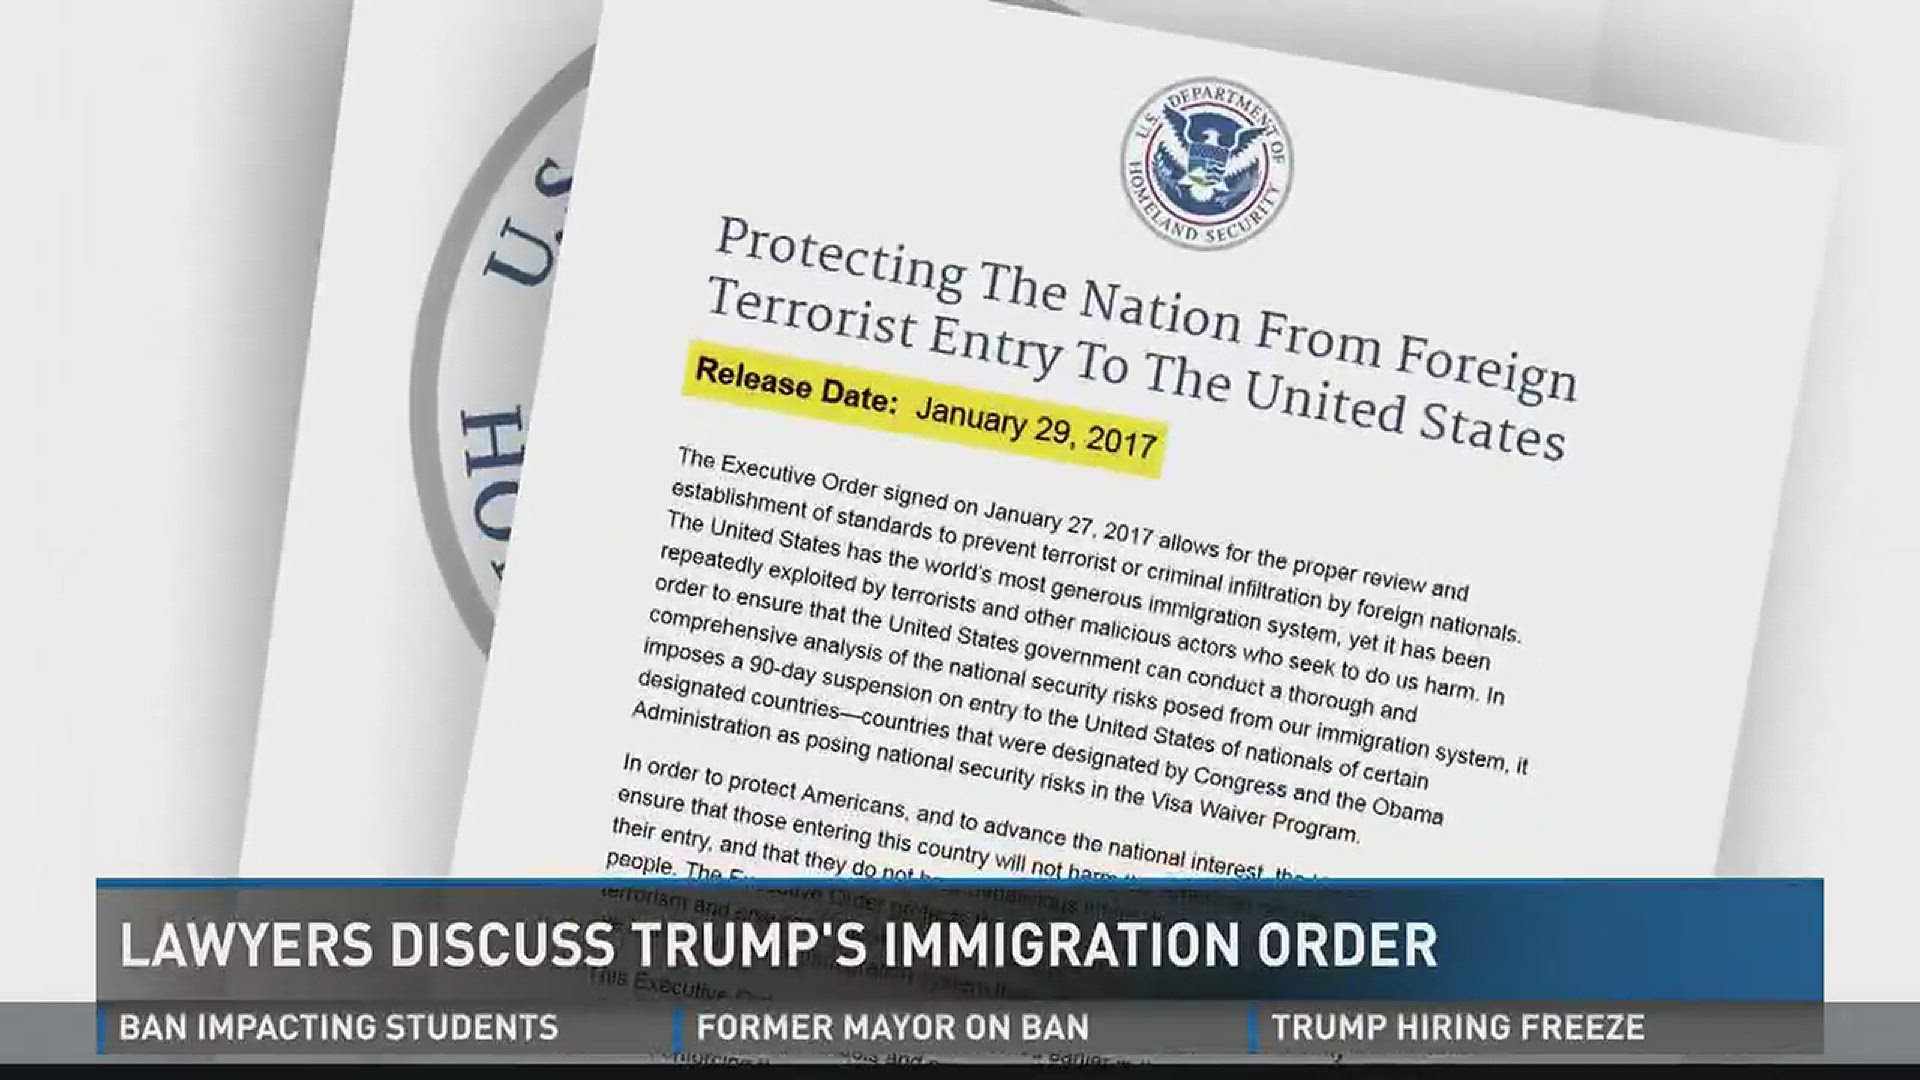 Lawyers discuss Trump's immigration order